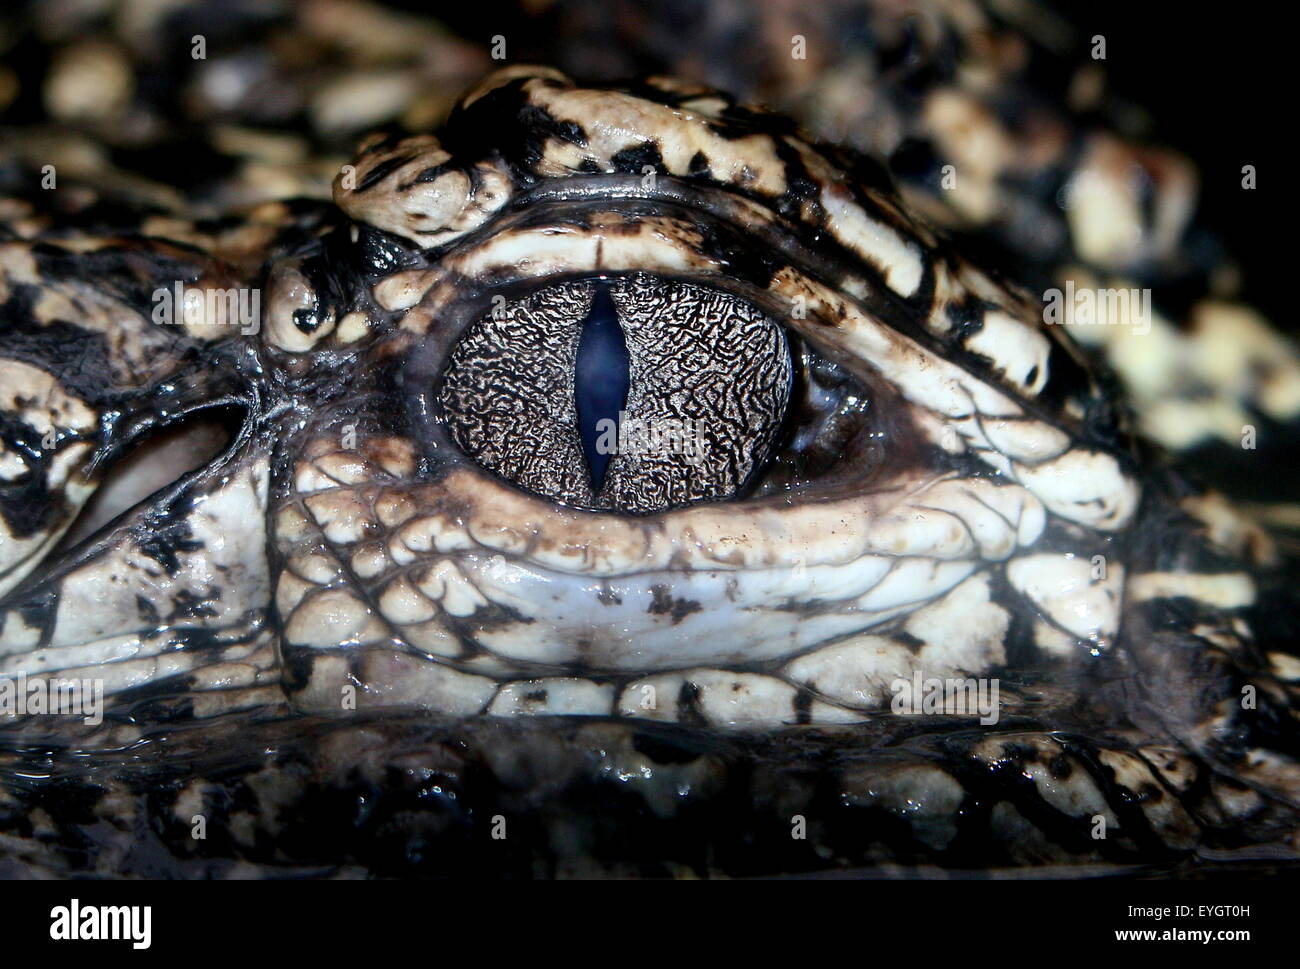 Extreme close-up of the eye of a Chinese alligator (Alligator sinensis) Stock Photo